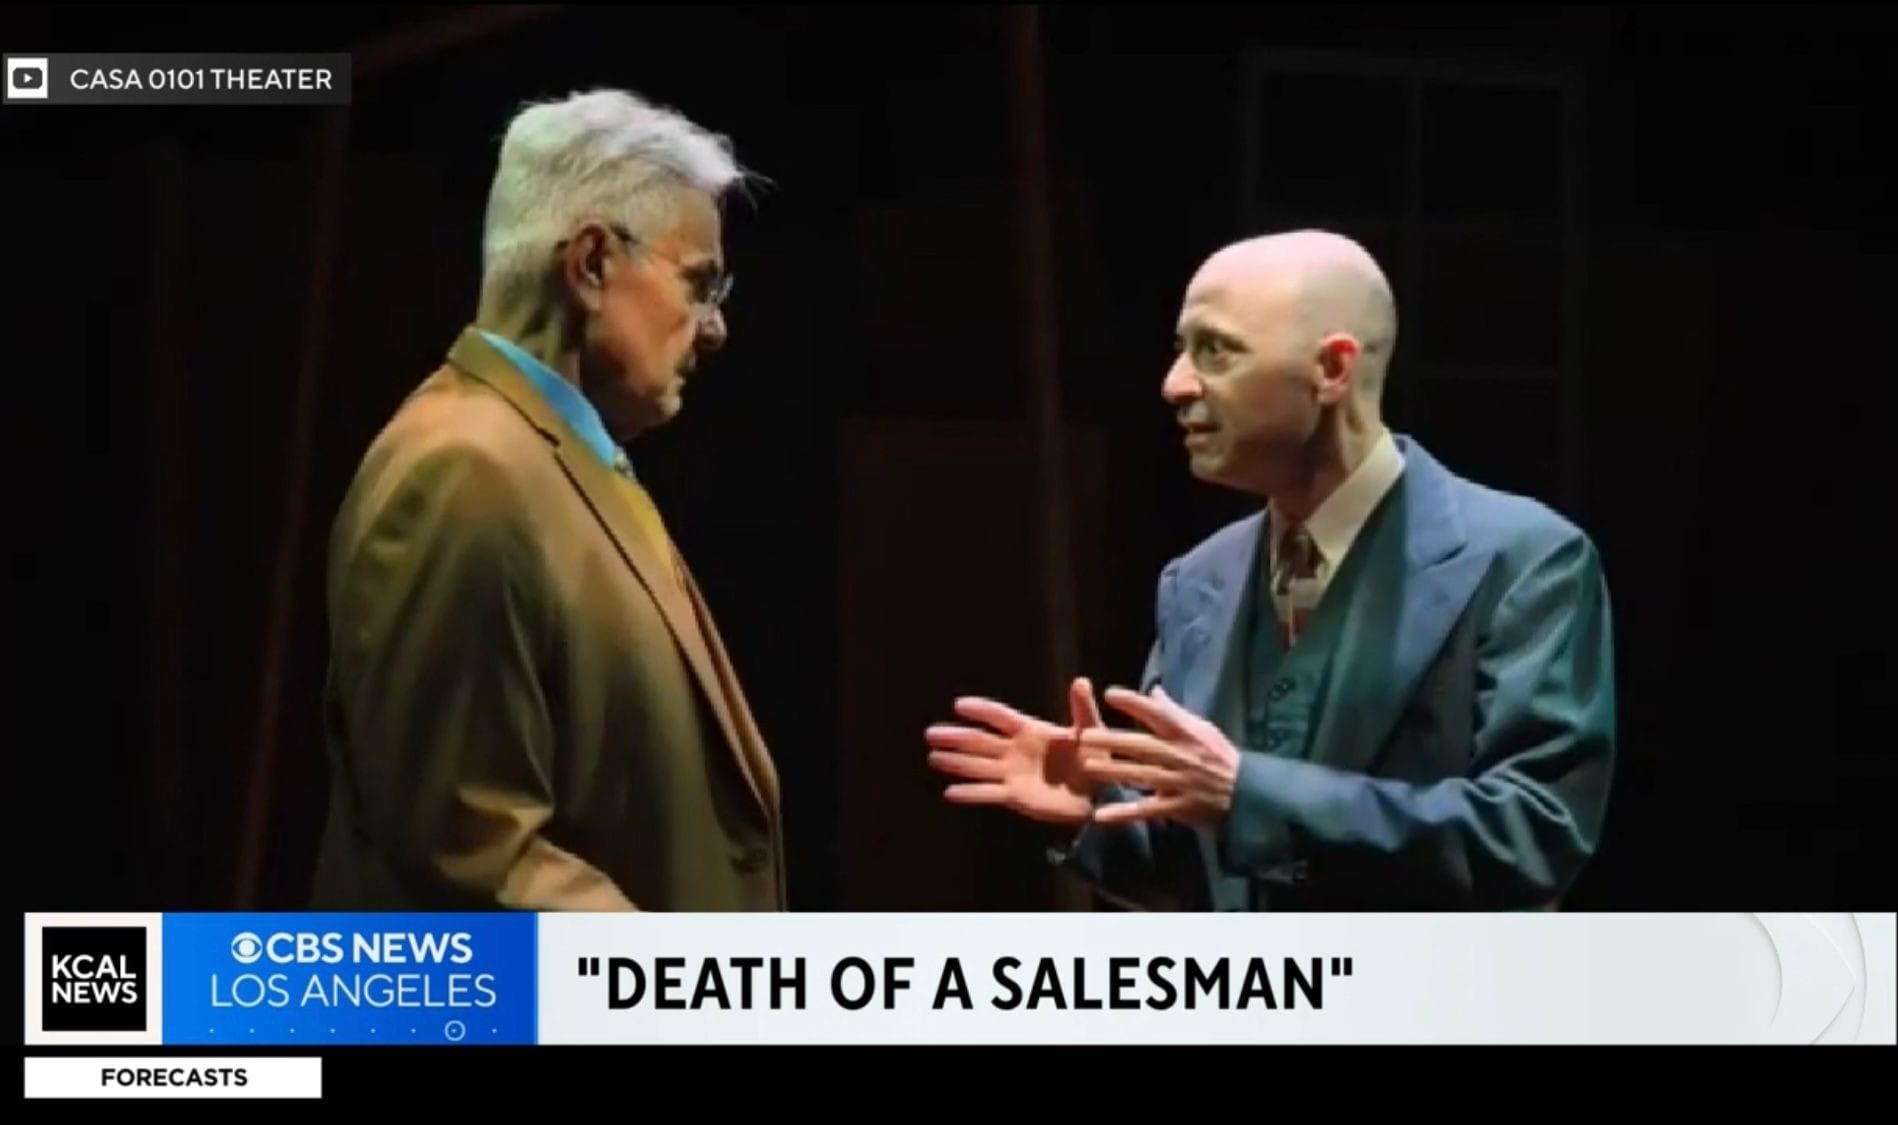 Jeff Blumberg in the role of Howard Wagner in Death of a Salesman at CASA 0101 in Boyle Heights, Los Angeles, California